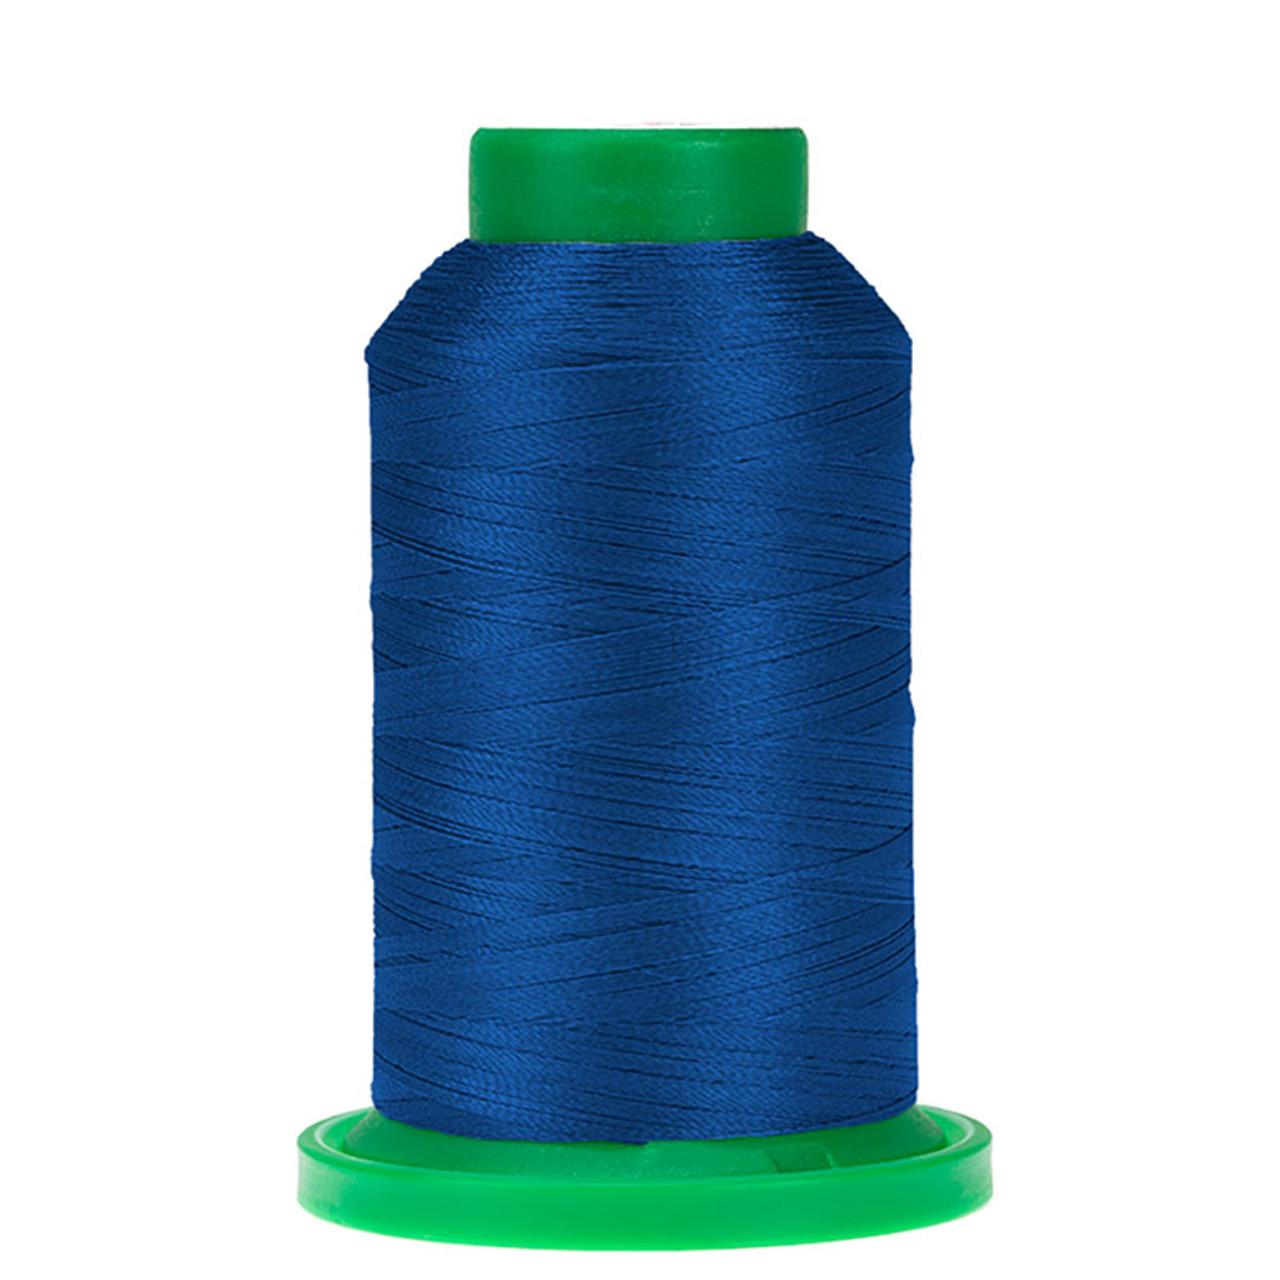 Thread, Isacord - Colonial Blue - 2922-3902 - SPECIAL ORDER